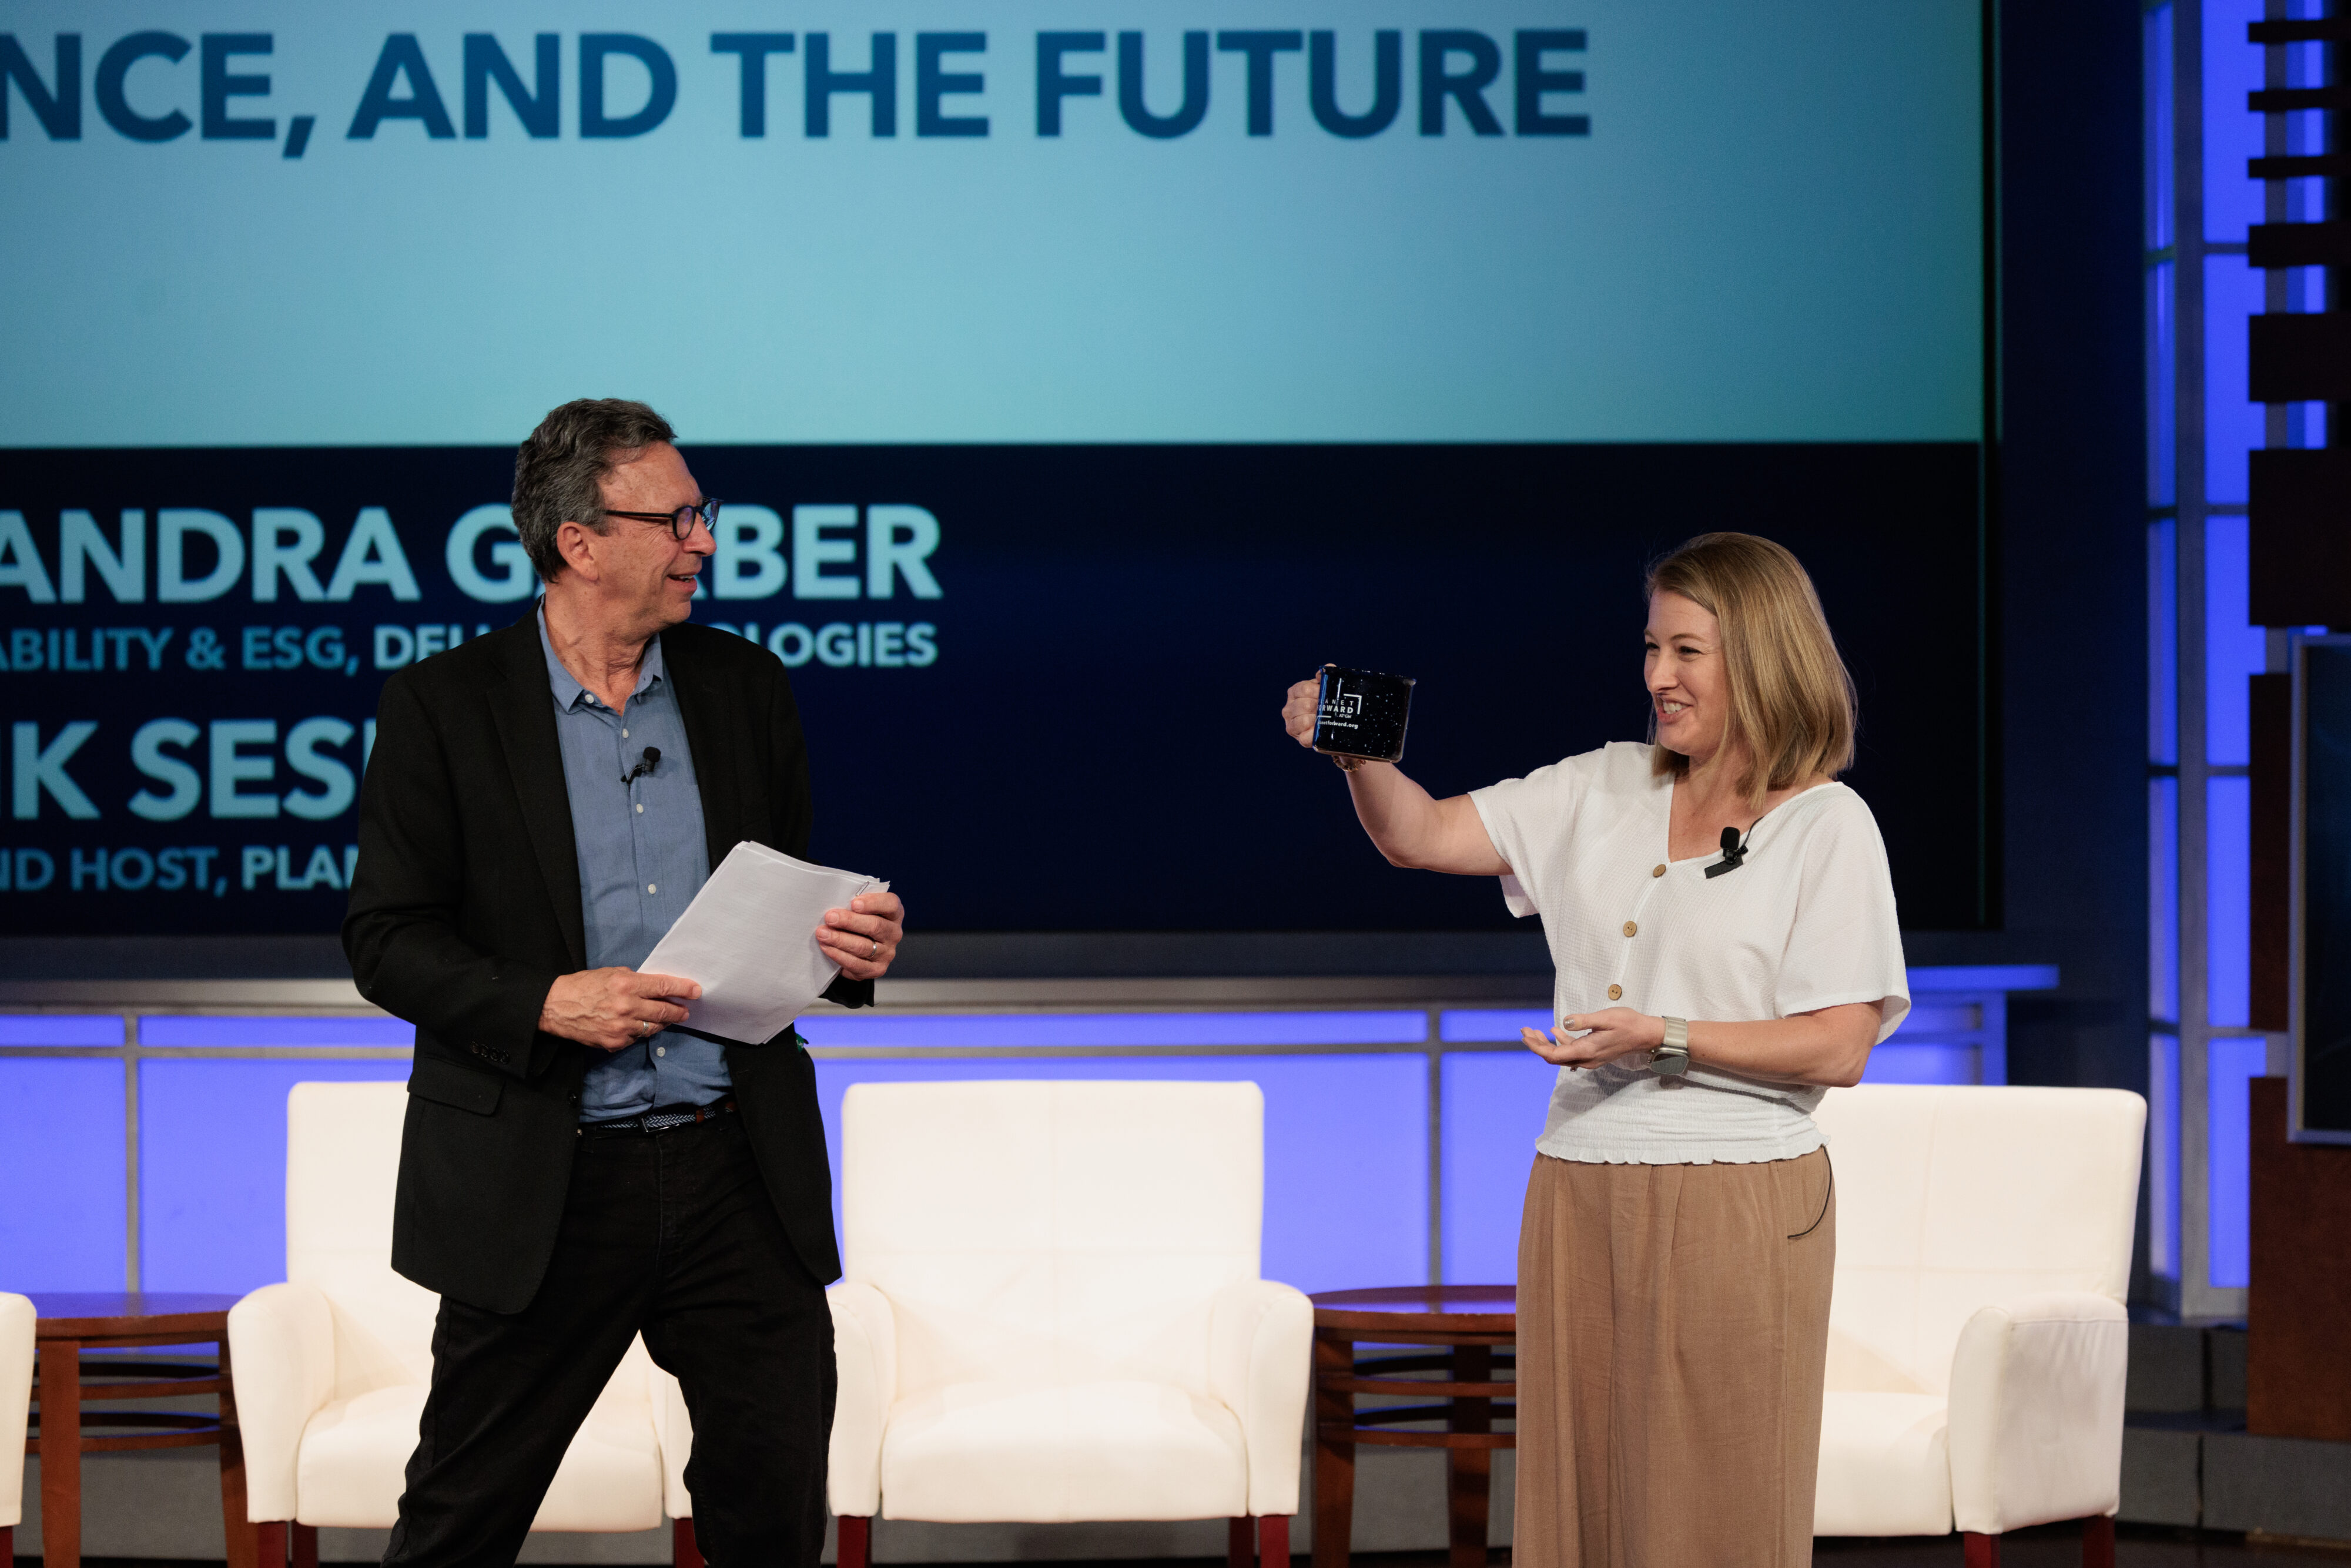 (From left to right) Frank Sesno and Cassandra Garber, VP, Corporate Sustainability & ESG, Dell Technologies; admire a Planet Forward Mug on stage and discuss the role of complexity and science in solving the world's most pressing problems. 